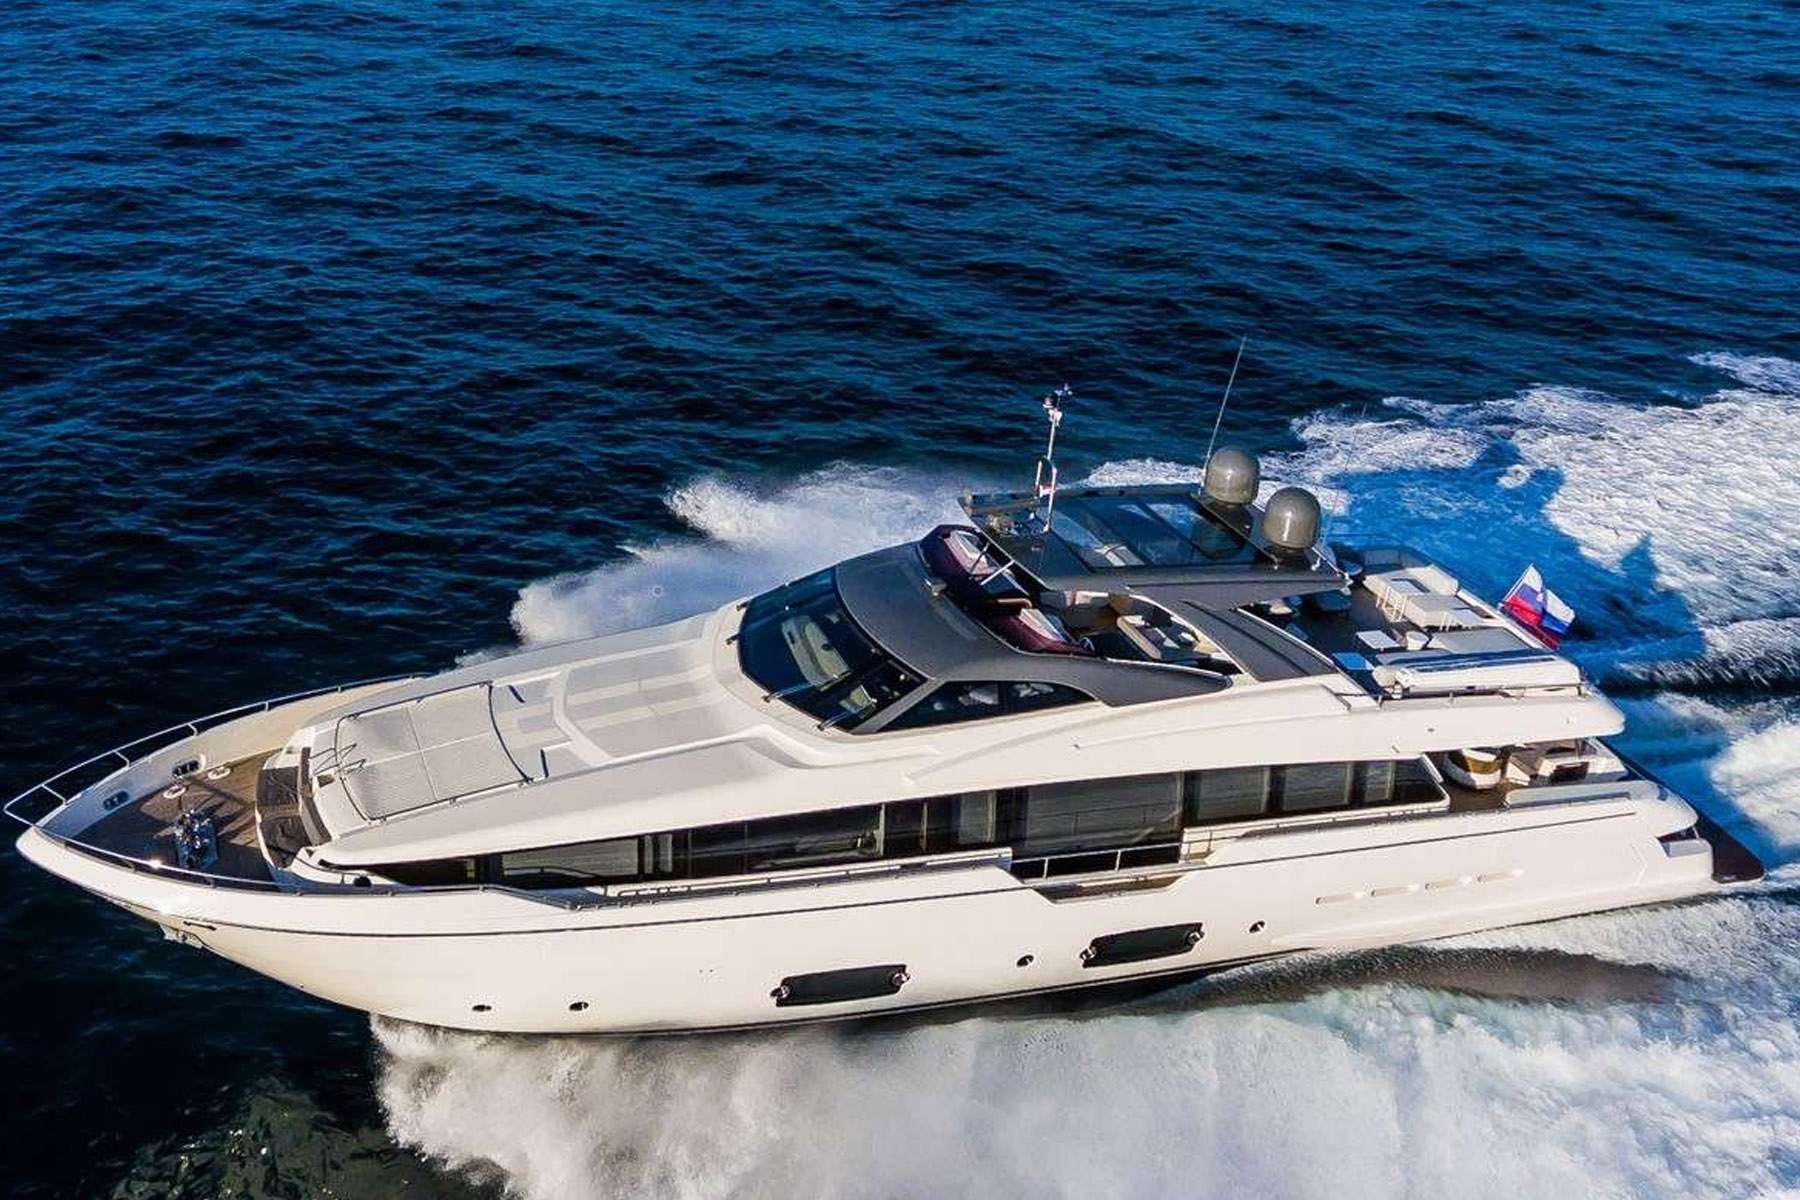 ISOTTA, a fantastic Ferretti 960 built in 2019. Part of the multi-award-winning Ferretti 960 series, this Italian-built M/Y ISOTTA is the perfect yacht for your family-friendly charter. Modern living spaces with a 4-stateroom layout, impressive outdoor areas and a large swim platform.
Captain Filip and his crew look forward to welcoming guests onboard ISOTTA and spoil them with their outstanding service.

